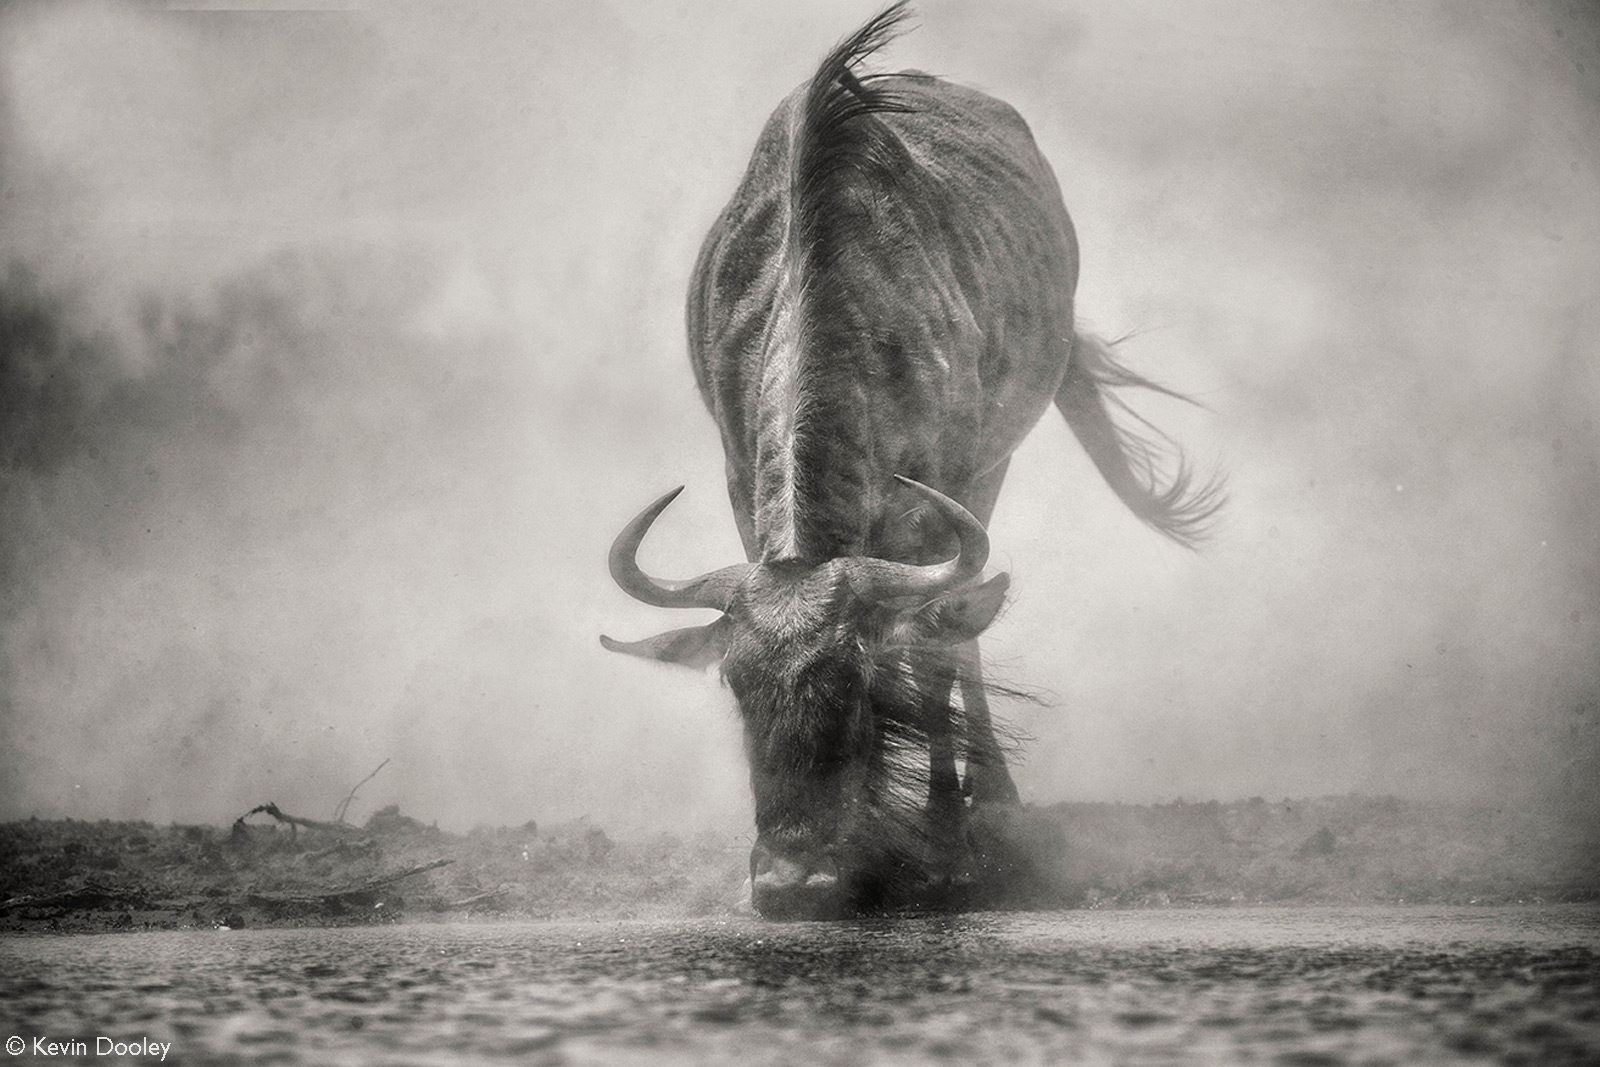 A massive dust storm brings this thirsty wildebeest to water. Mashatu Game Reserve, Botswana © Kevin Dooley